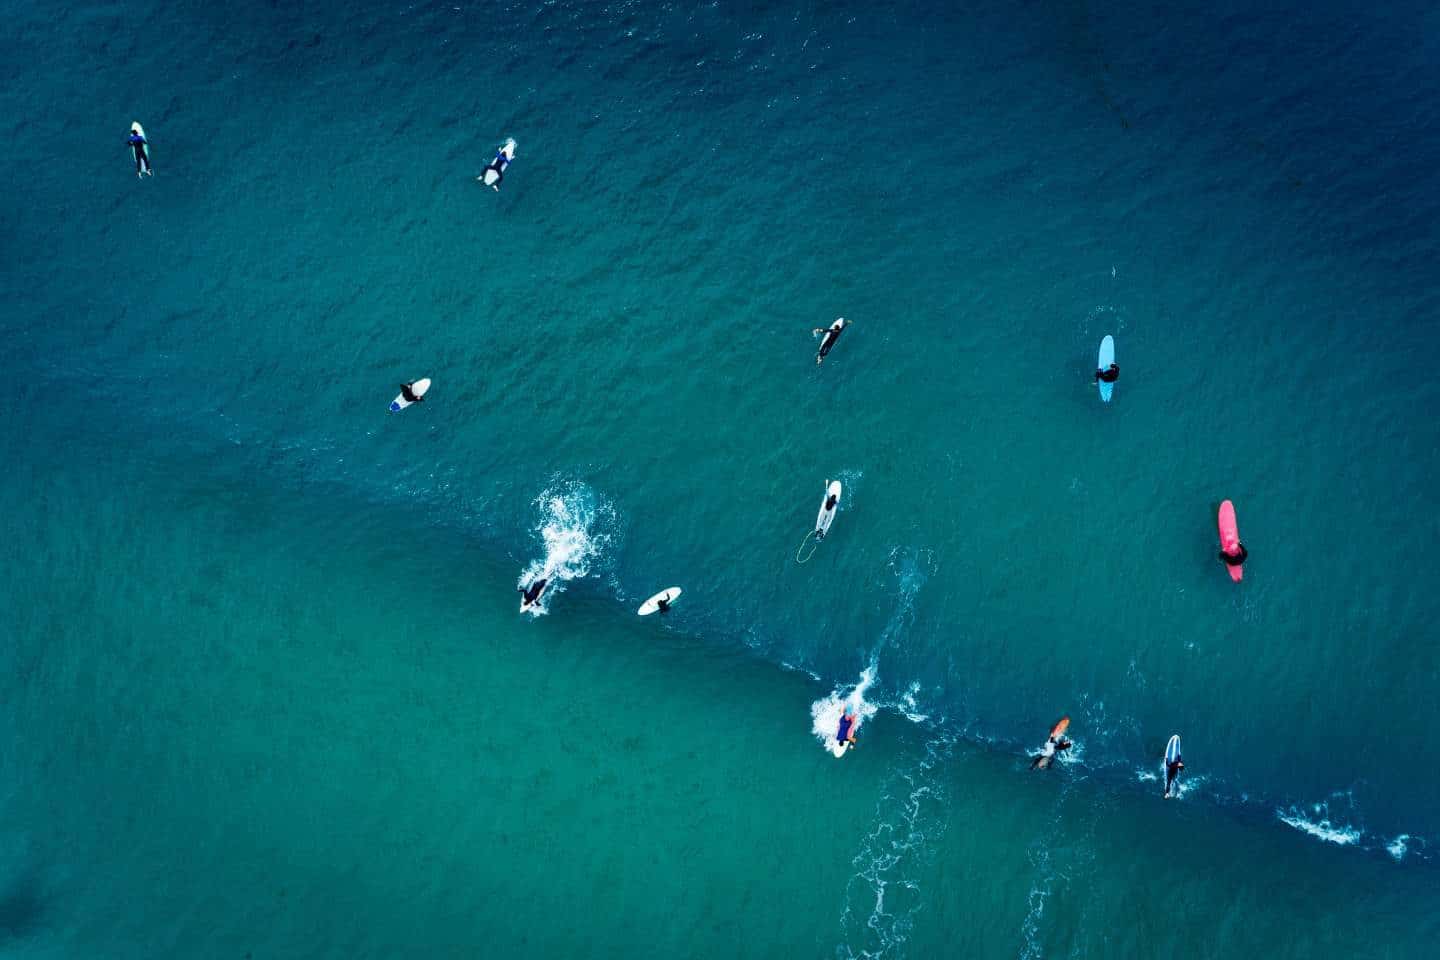 A group of people surfing in Baleal, Portugal